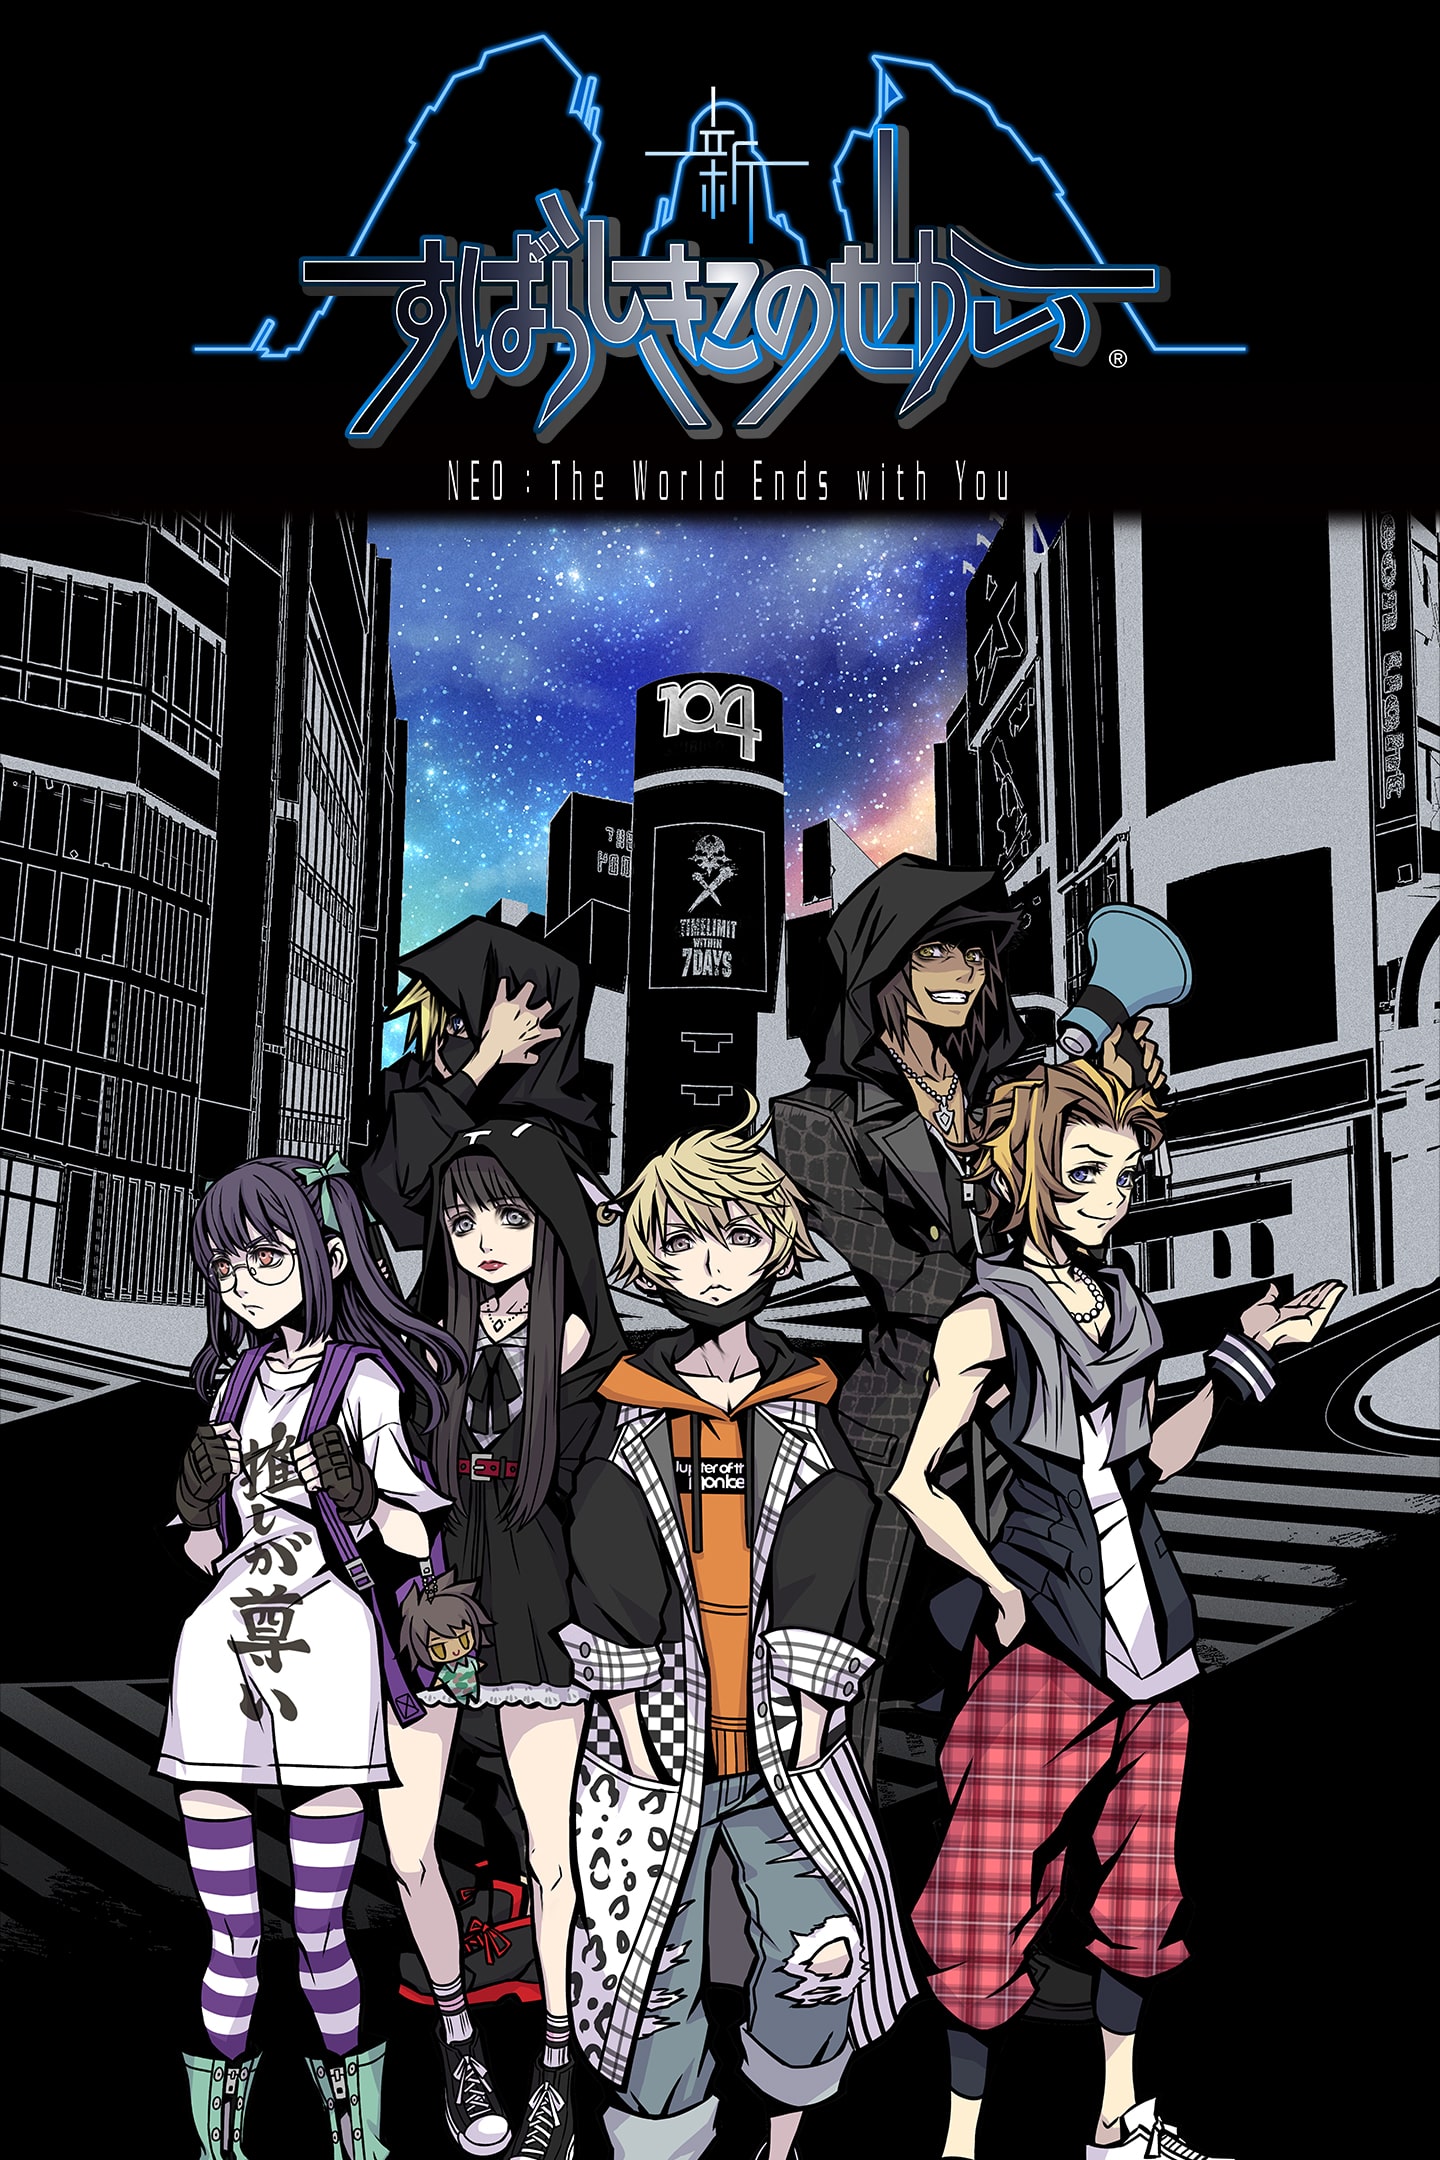 NEO: The World Ends with You (영어, 일본어)